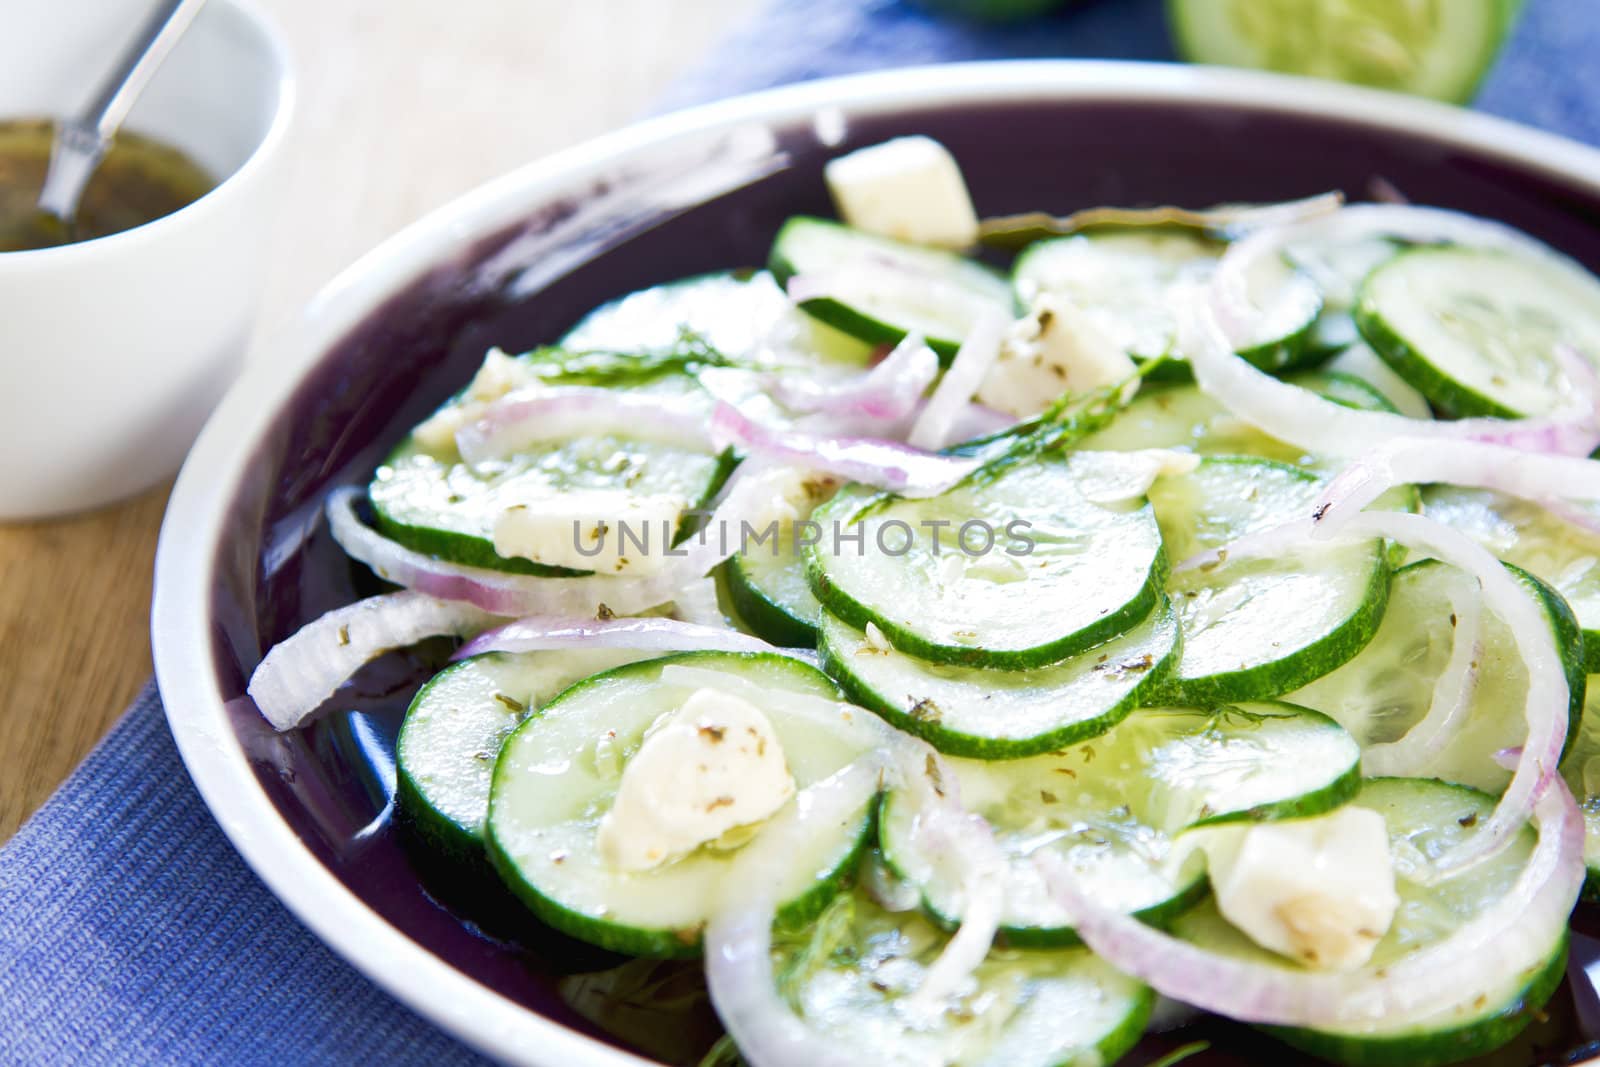 Cucumber with Feta and herb salad